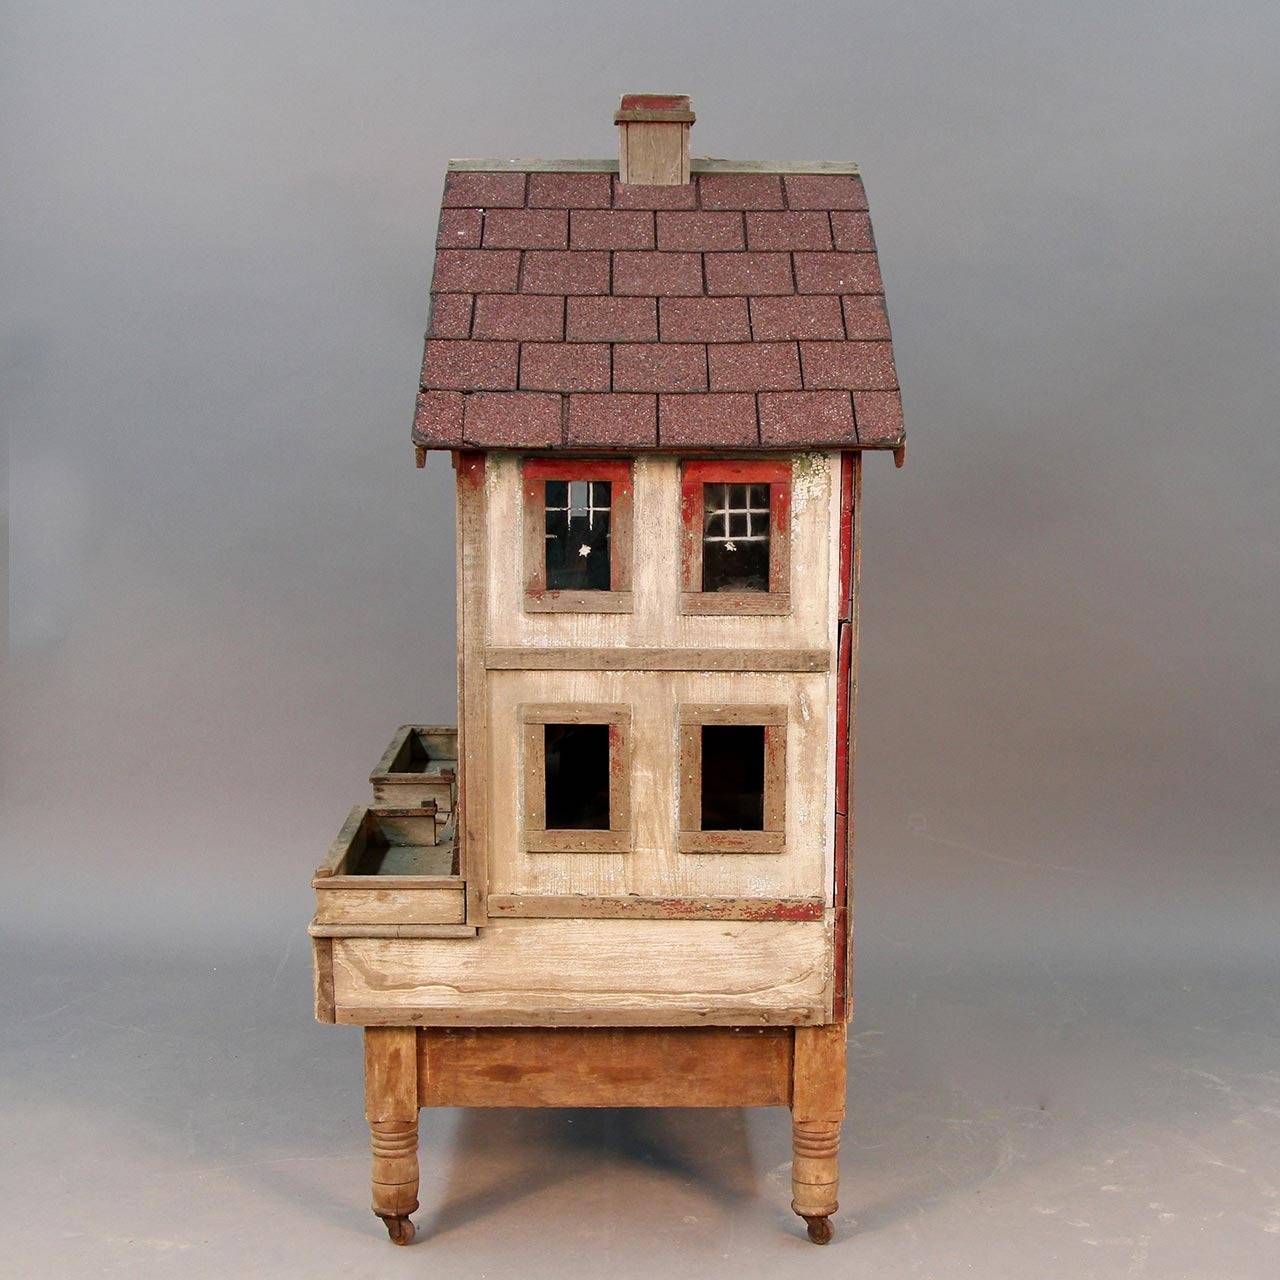 Grand handcrafted early 20th century one of a kind aviary doll house is complete with window openings on all four sides and a working front door! This wooden structure has aged to a truly lovely patina. The entire front opens for easy access and the